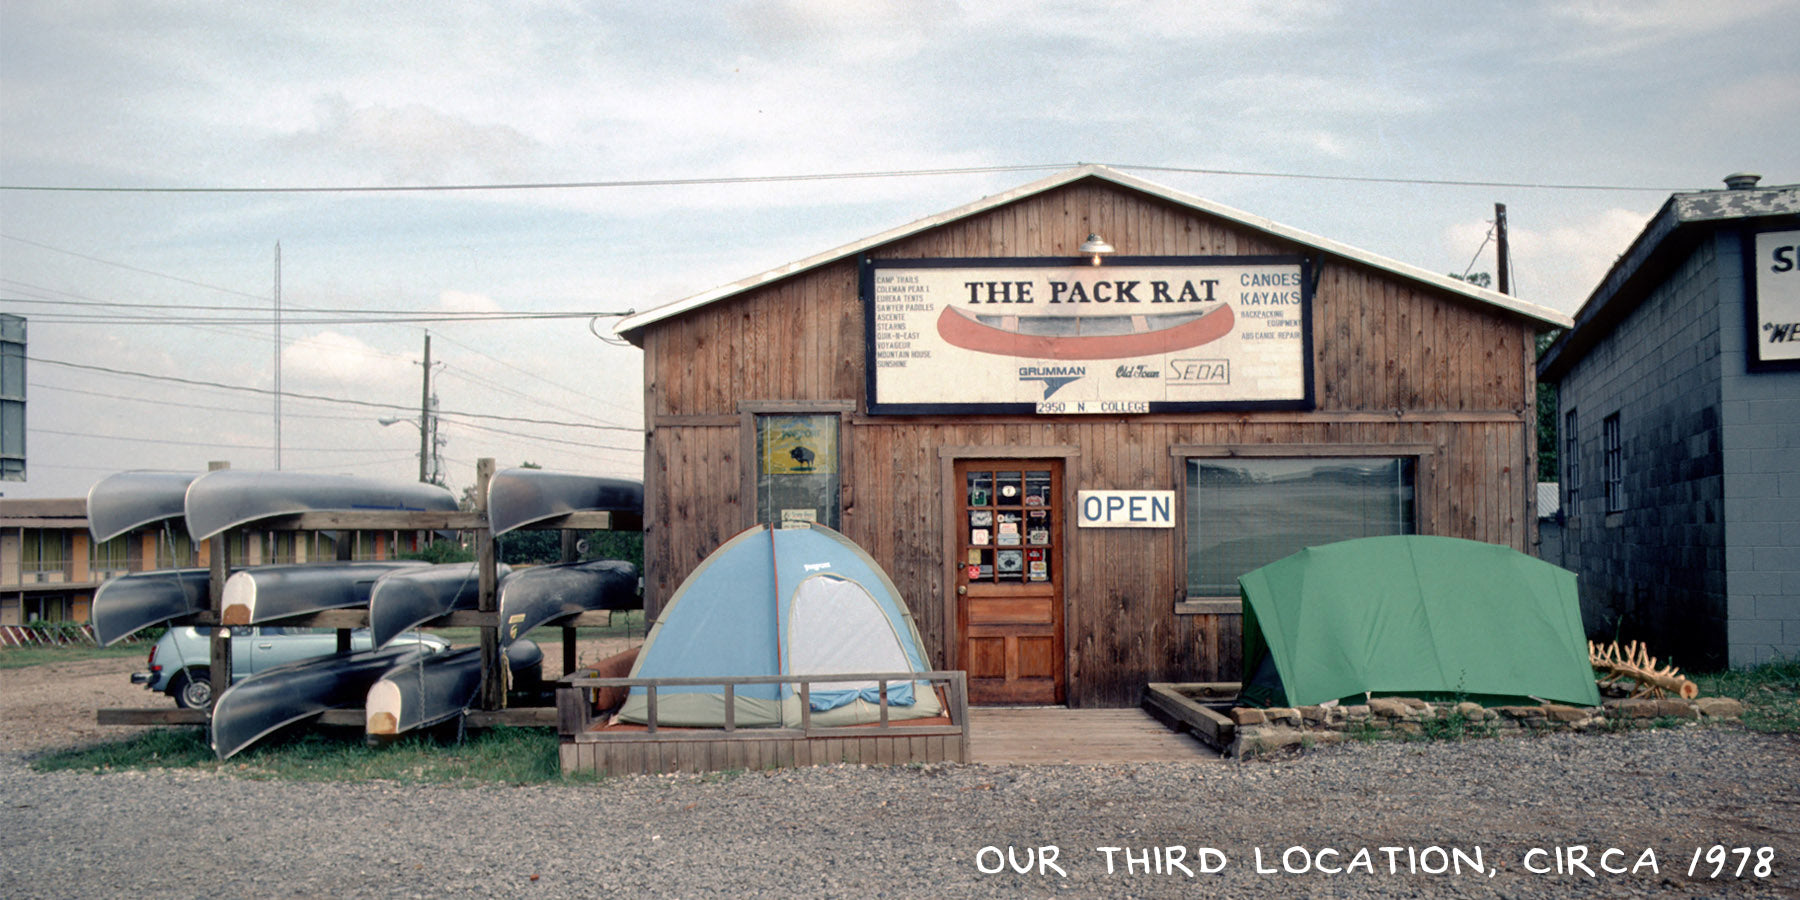 A wooden building with canoe and tents set up outside. The building's sign reads "The Pack Rat". An image of the third location of Pack Rat Outdoor Center.